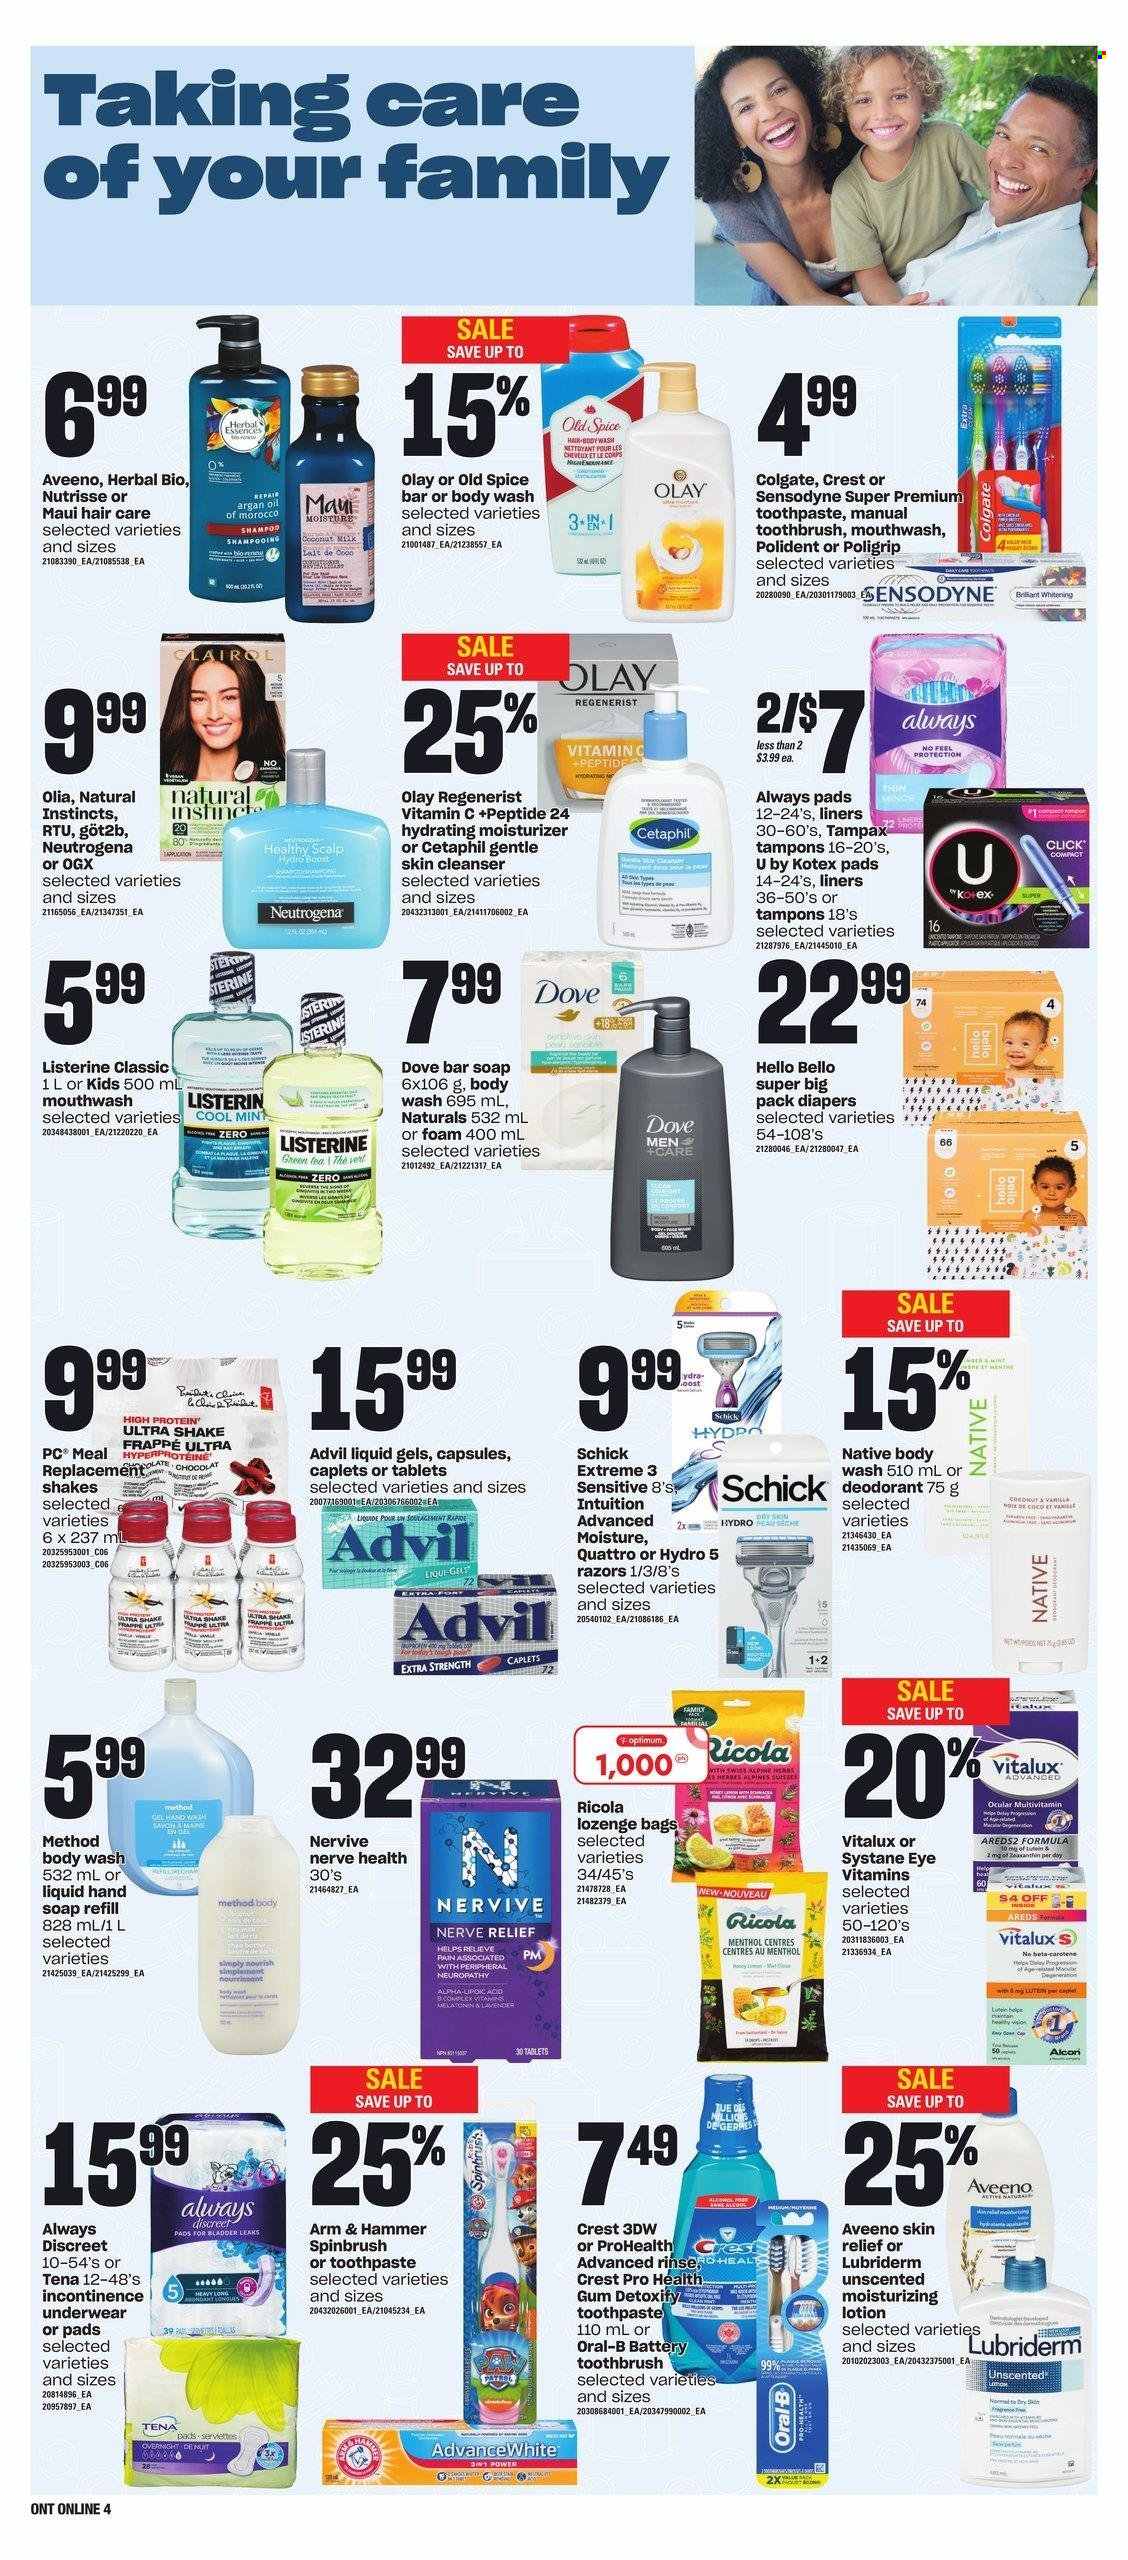 thumbnail - Loblaws Flyer - February 02, 2023 - February 08, 2023 - Sales products - Président, shake, Dove, Ricola, ARM & HAMMER, coconut milk, spice, Boost, green tea, tea, nappies, Aveeno, body wash, hand soap, soap bar, soap, toothbrush, toothpaste, mouthwash, Polident, Crest, Always pads, sanitary pads, Always Discreet, Kotex, Kotex pads, incontinence underwear, tampons, cleanser, moisturizer, Olay, OGX, Clairol, body lotion, Lubriderm, anti-perspirant, Schick, bag, Optimum, BETA, multivitamin, vitamin c, argan oil, Advil Rapid, Colgate, Listerine, Neutrogena, shampoo, Systane, Tampax, Old Spice, Oral-B, Sensodyne, deodorant. Page 10.